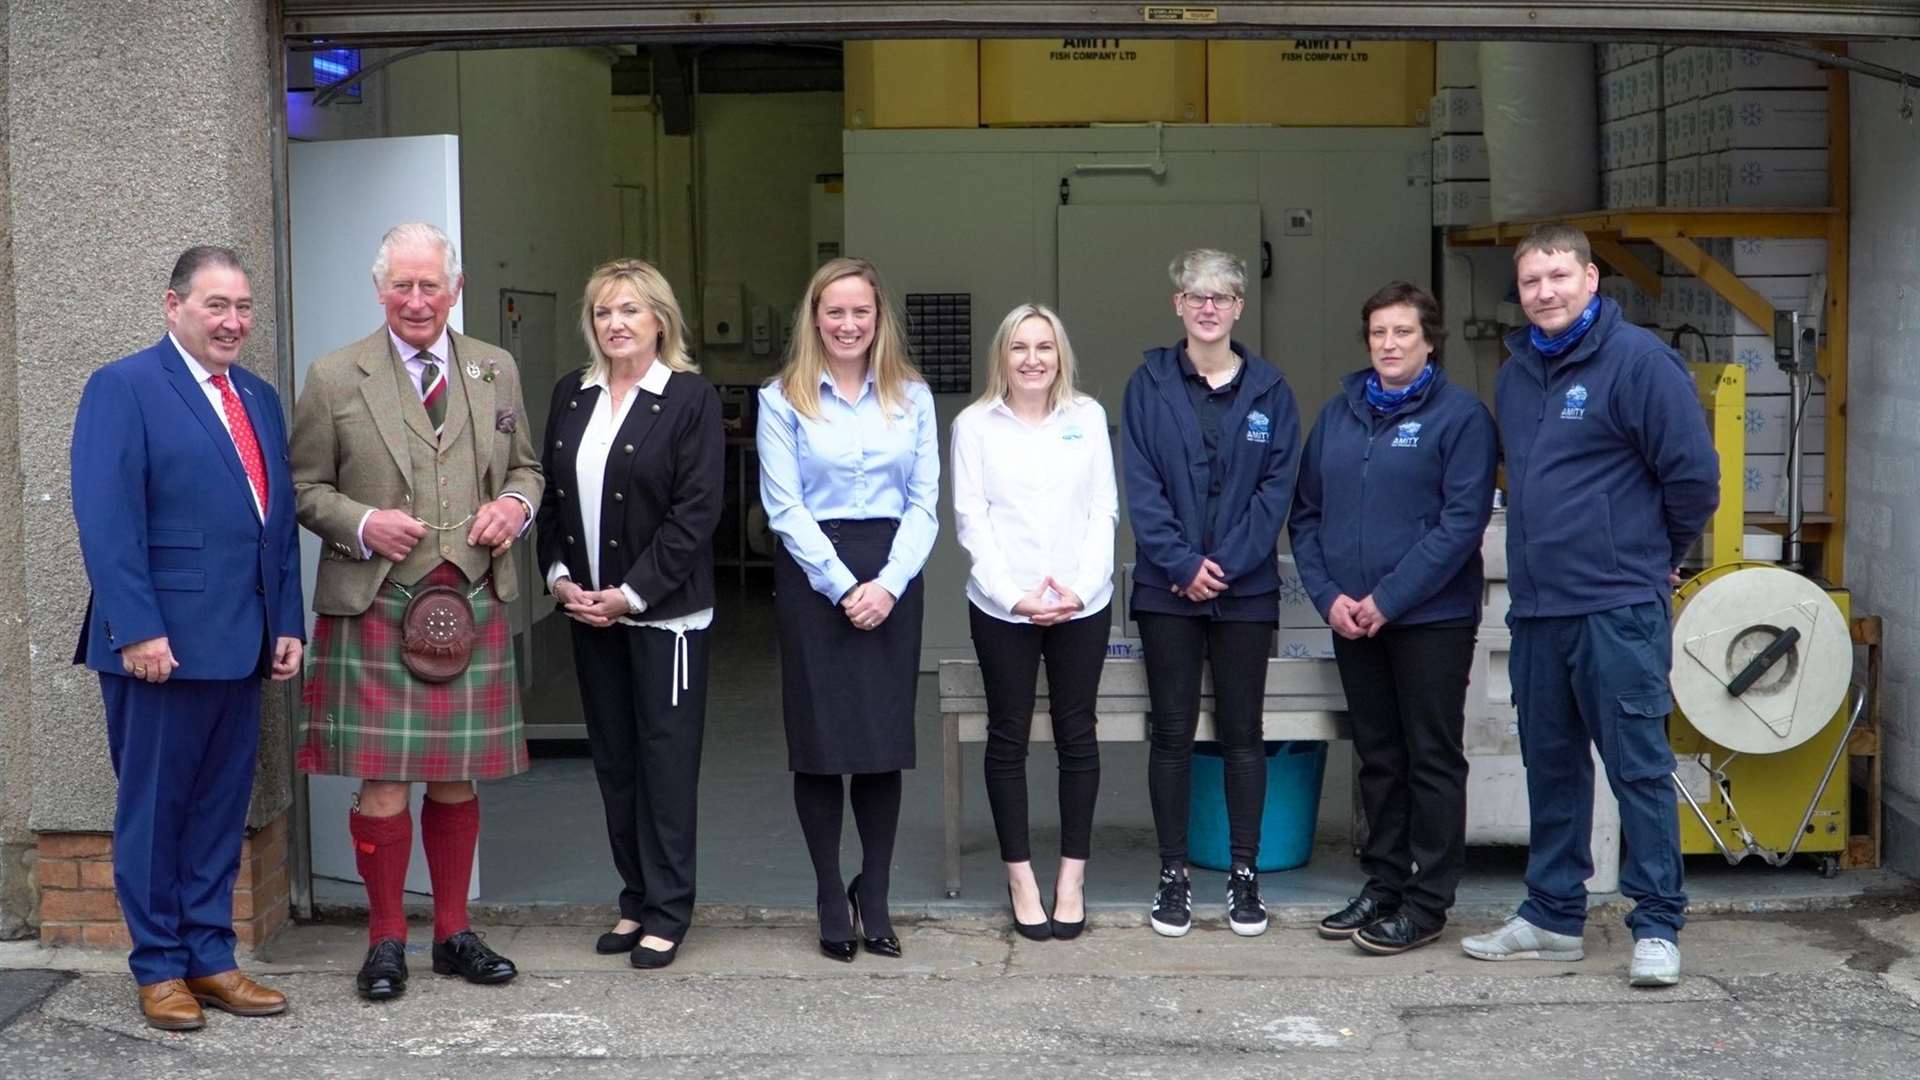 The Duke of Rothesay with Jimmy and Irene Buchan and staff at Amity Fish Company.